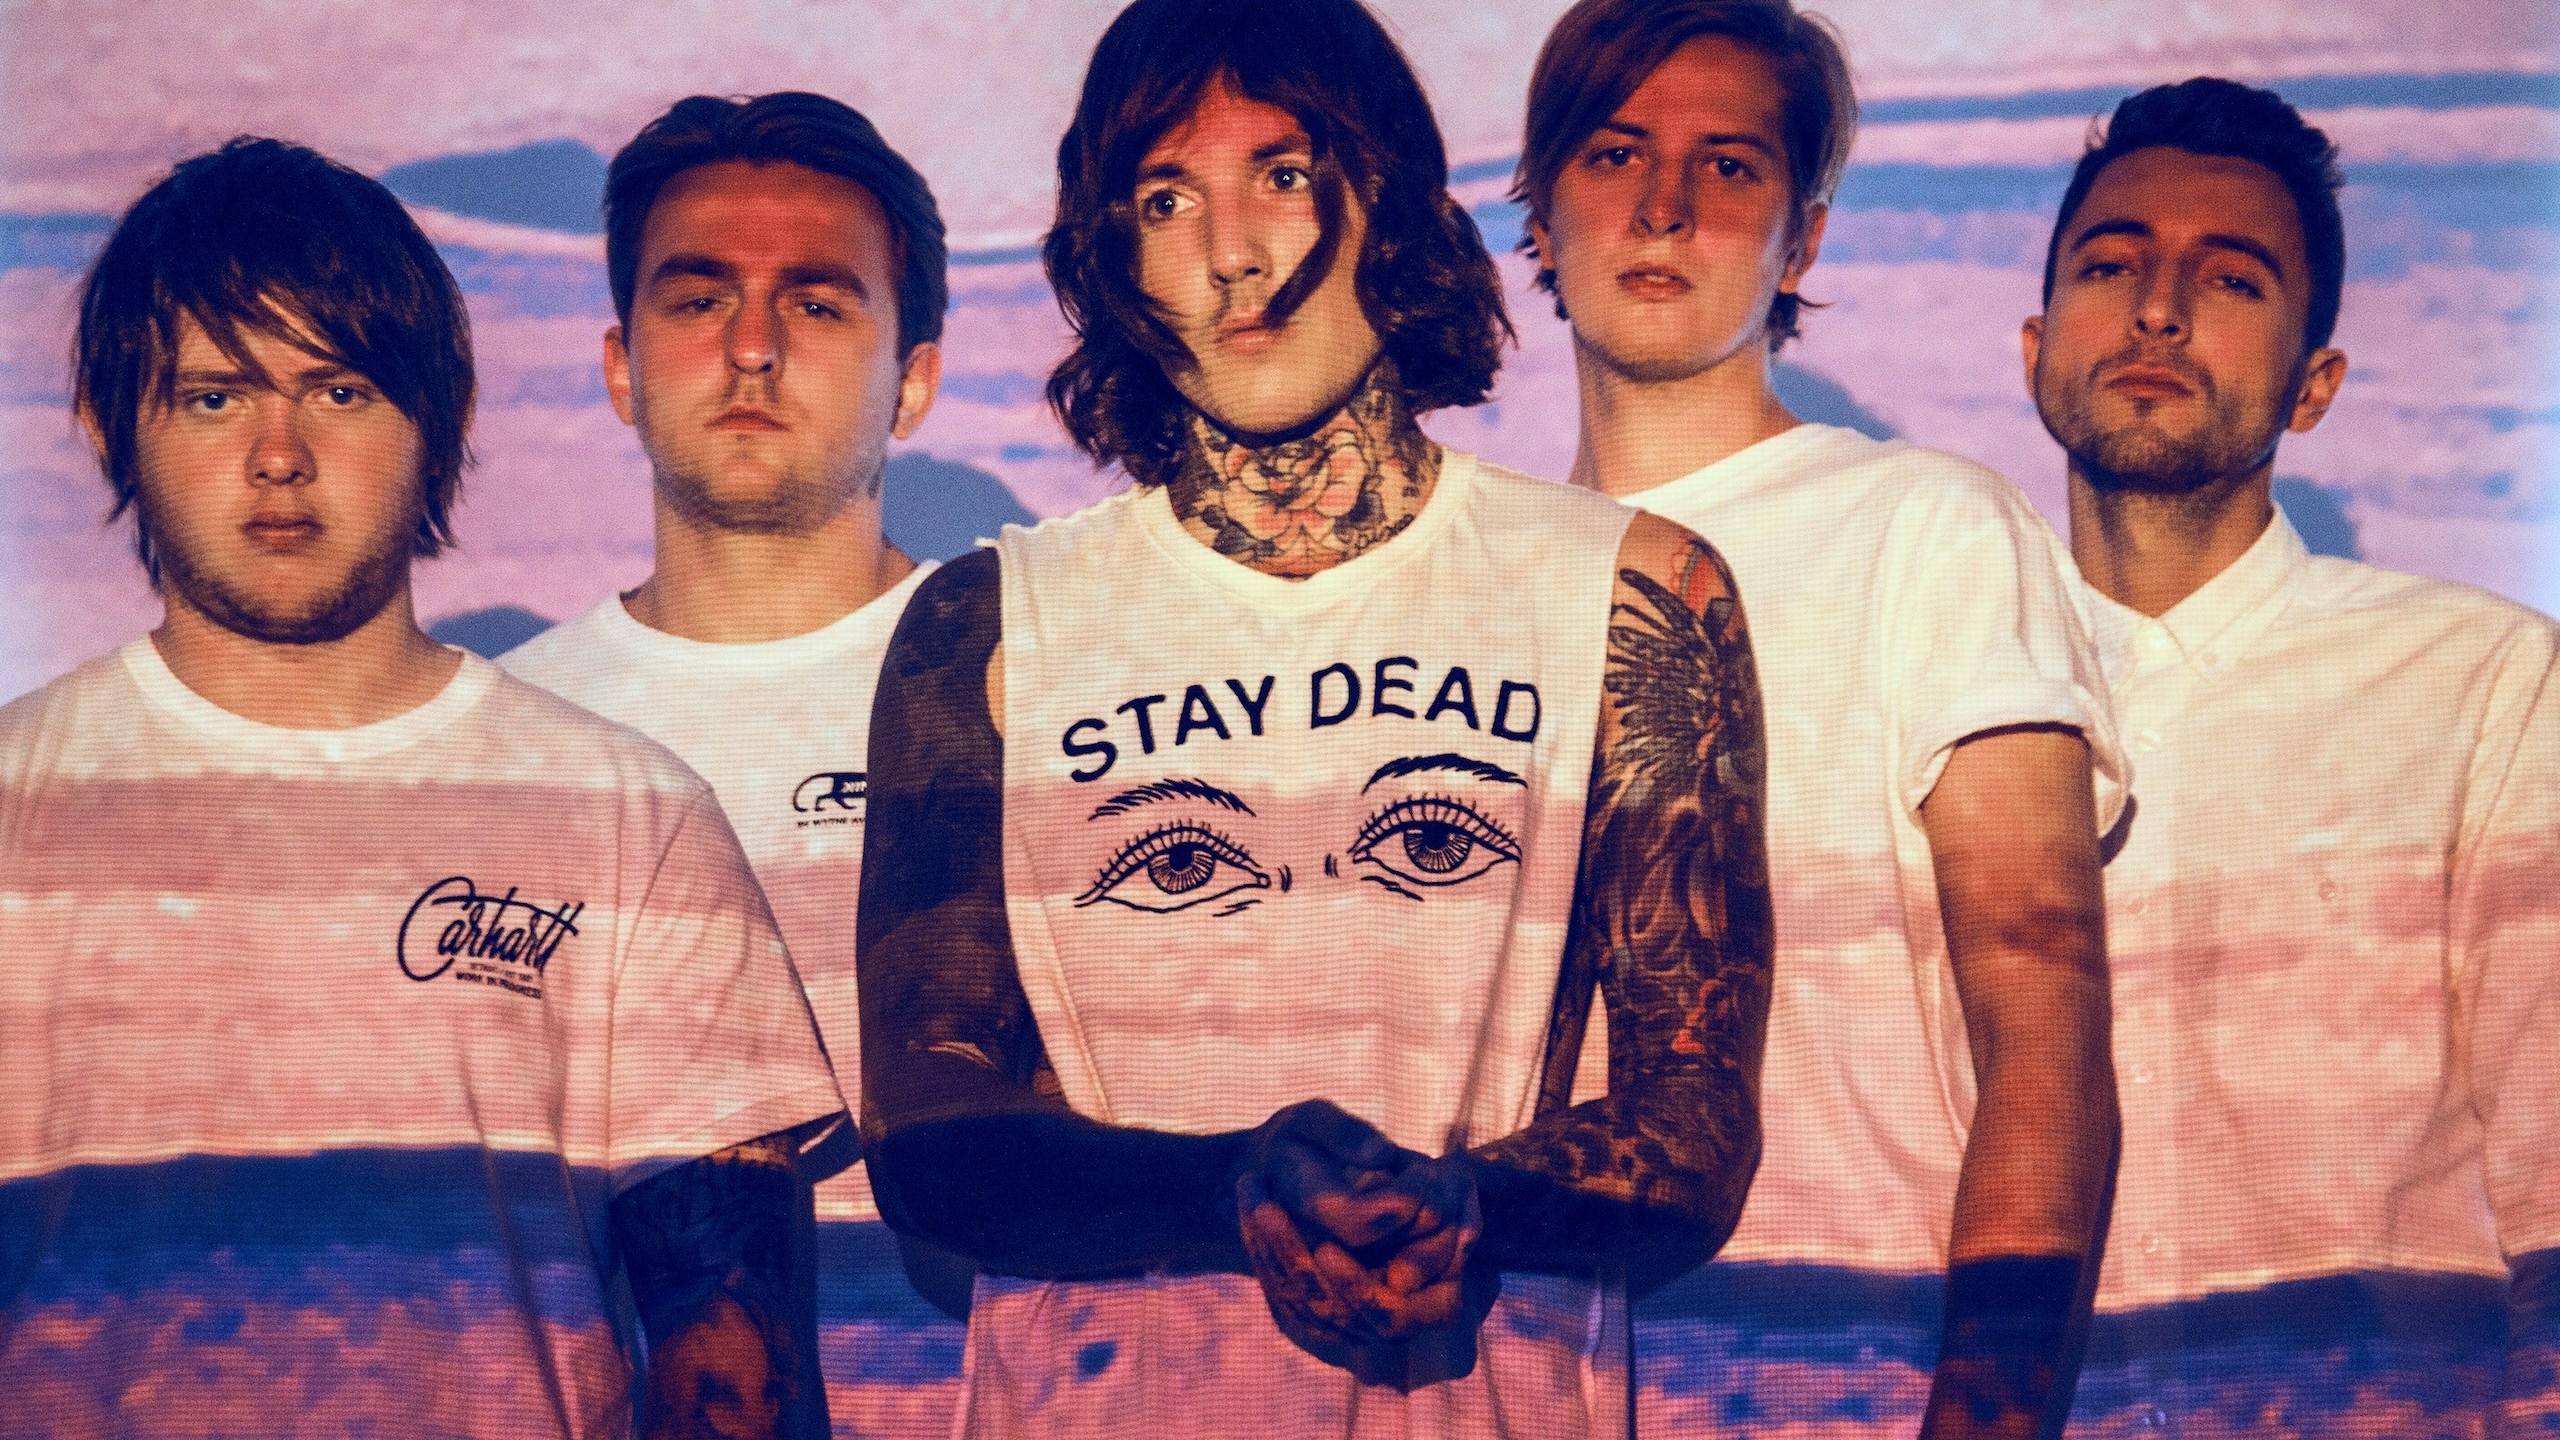 Oli Sykes Says Bring Me The Horizon Are Keen To 